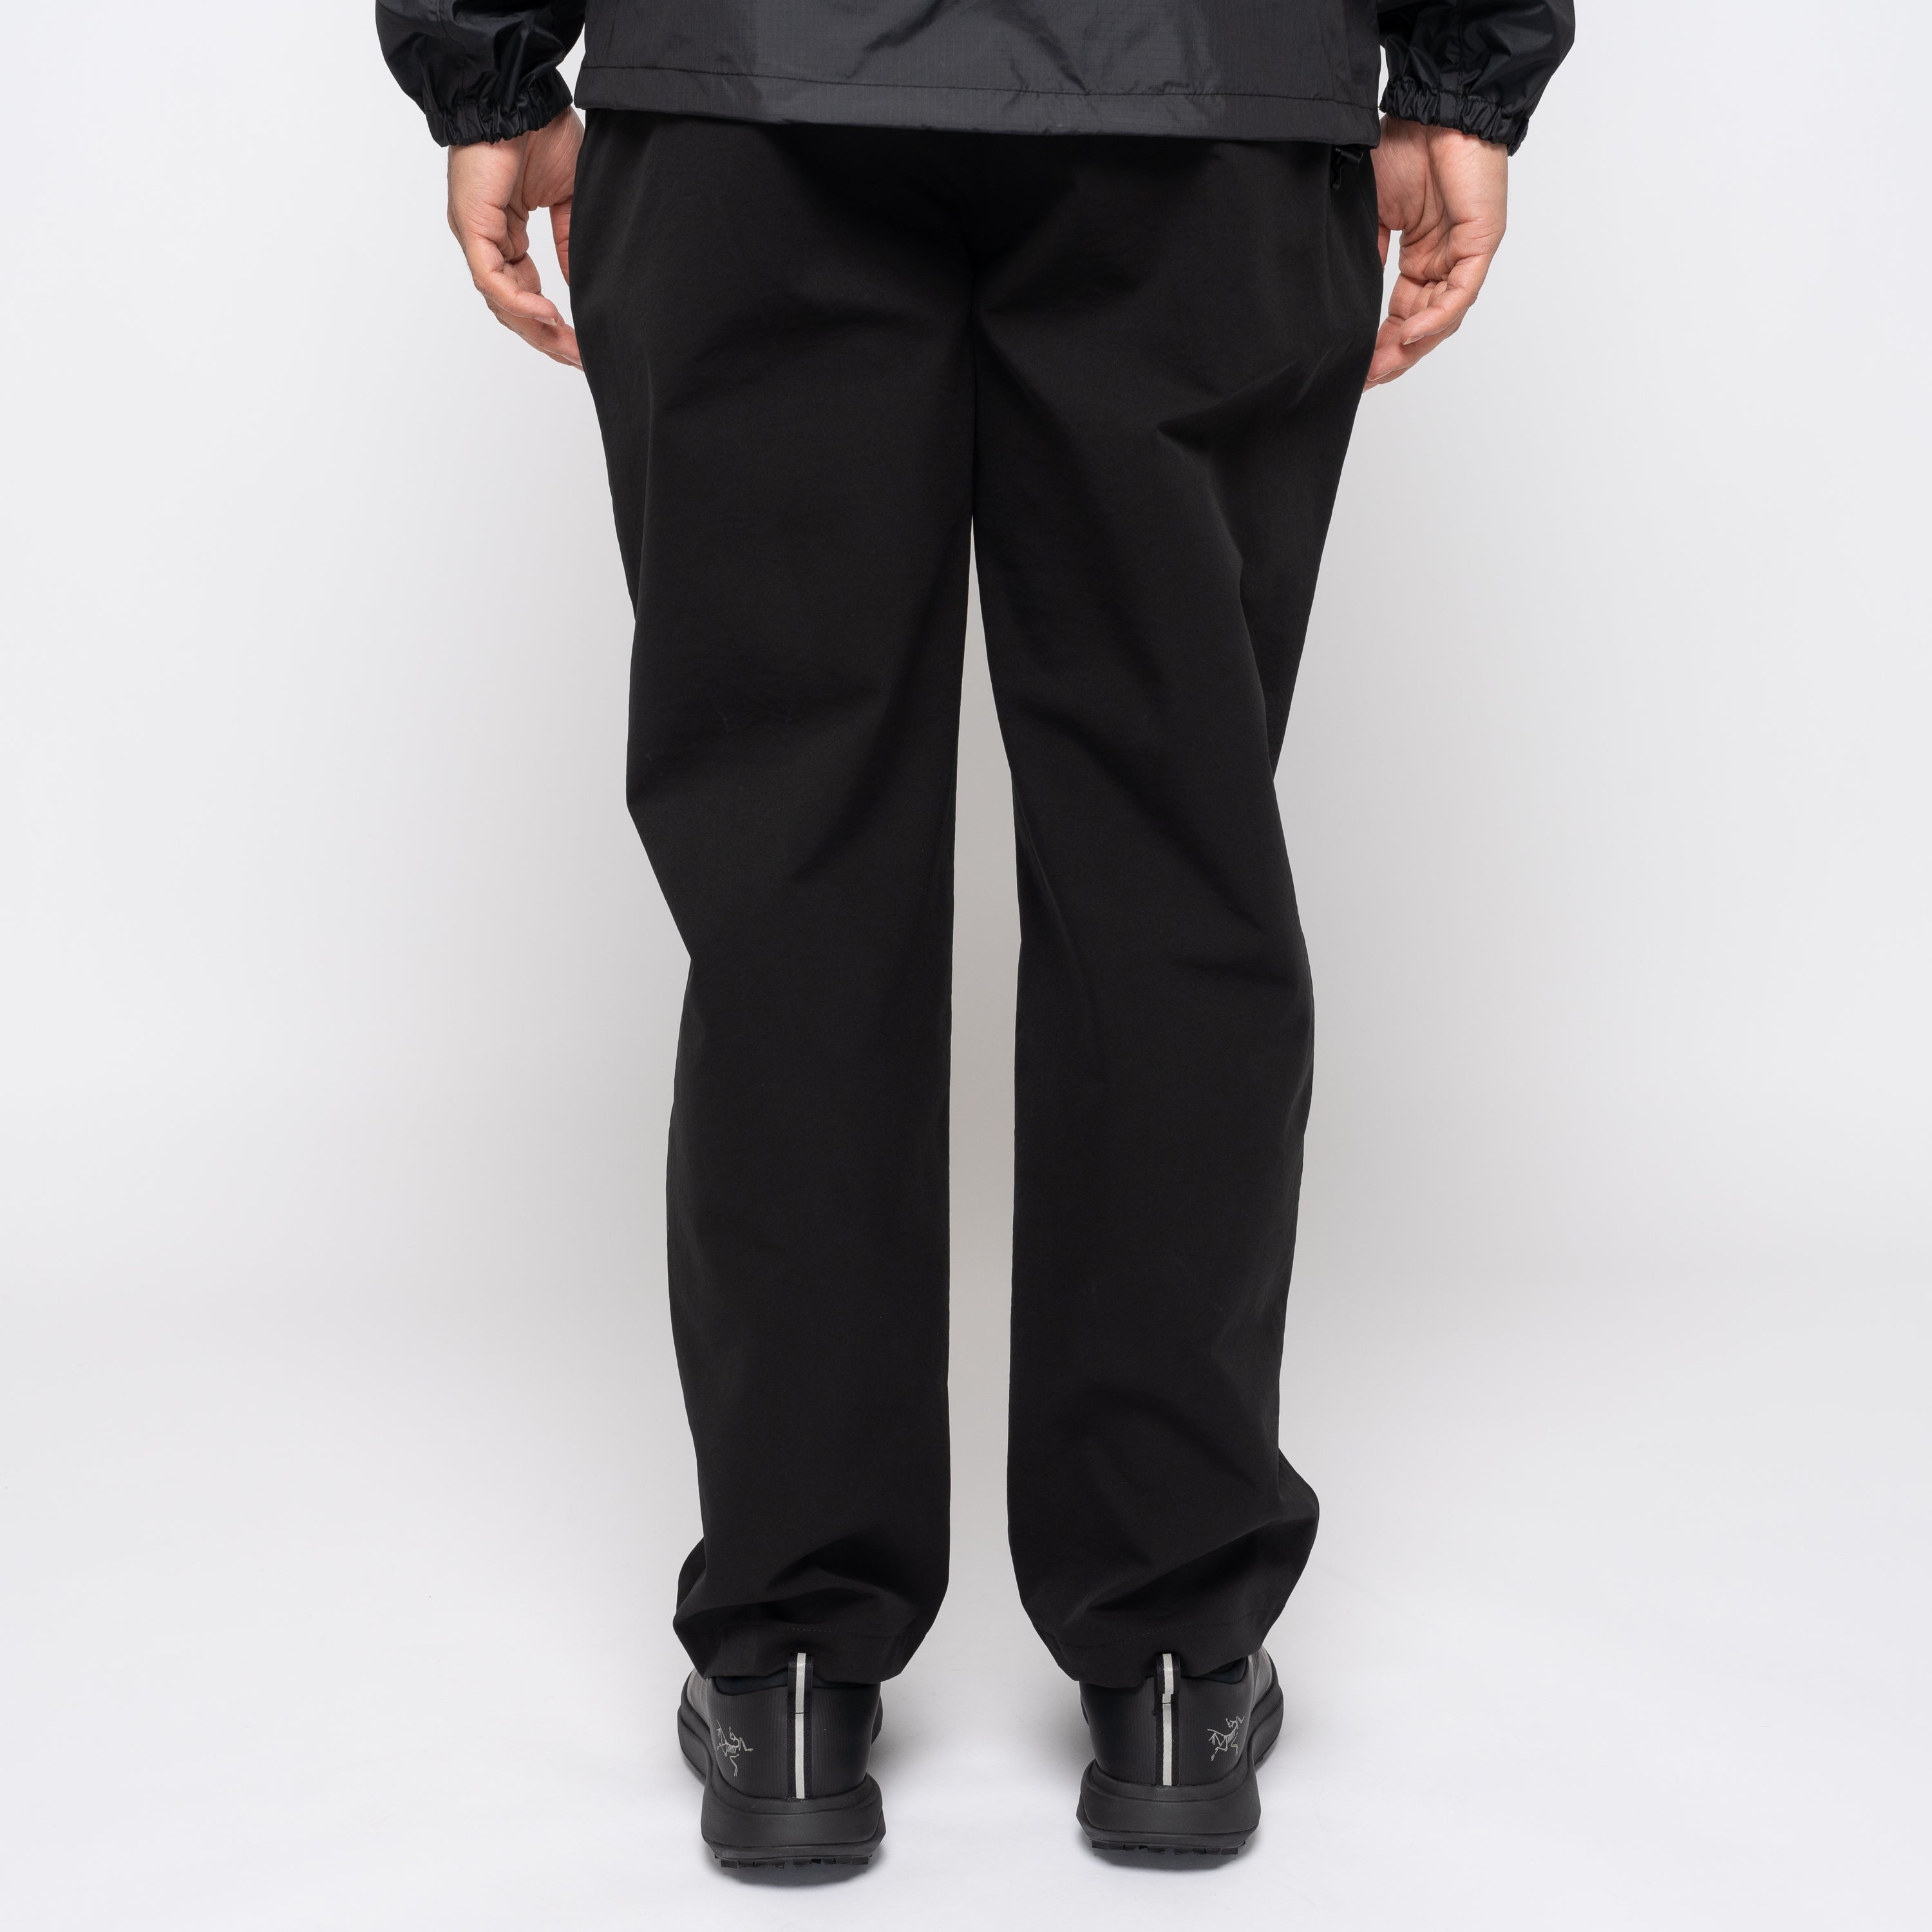 One Tuck Tapered Stretch Pants Black GL74198